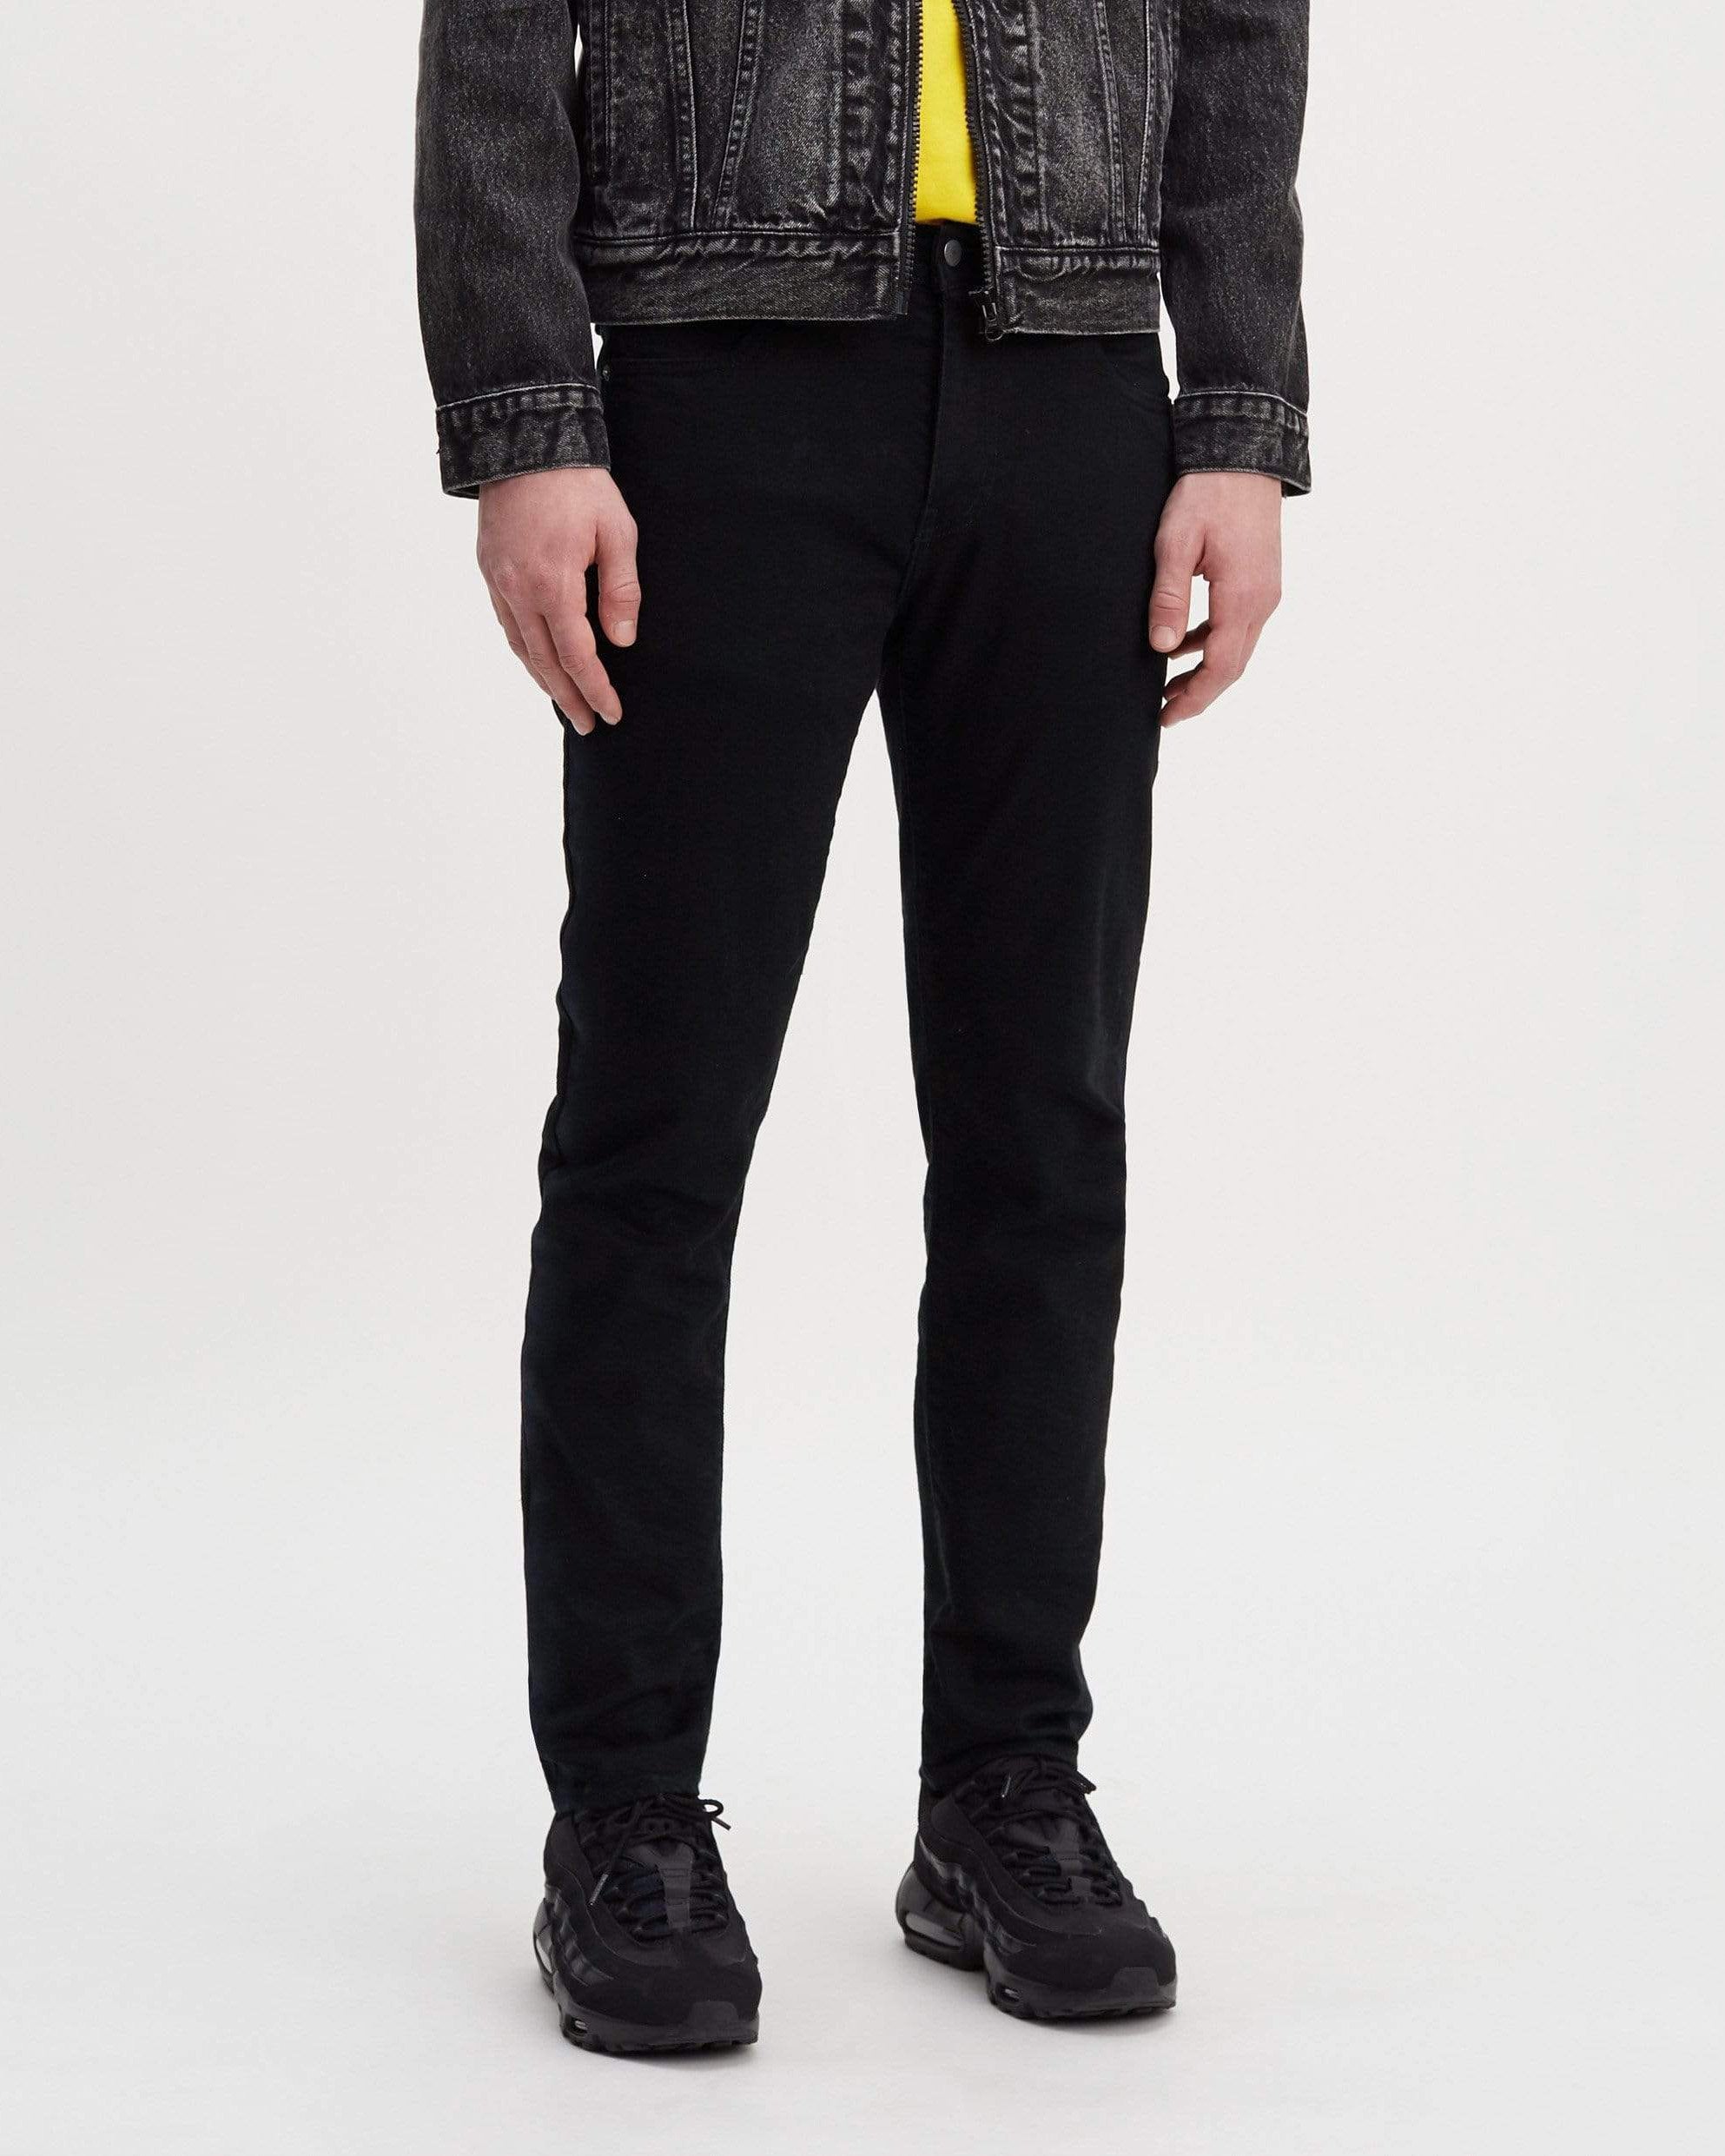 Levis 512 Slim Tapered Mens Jeans - Nightshine Black - Jeans and Street  Fashion from Jeanstore